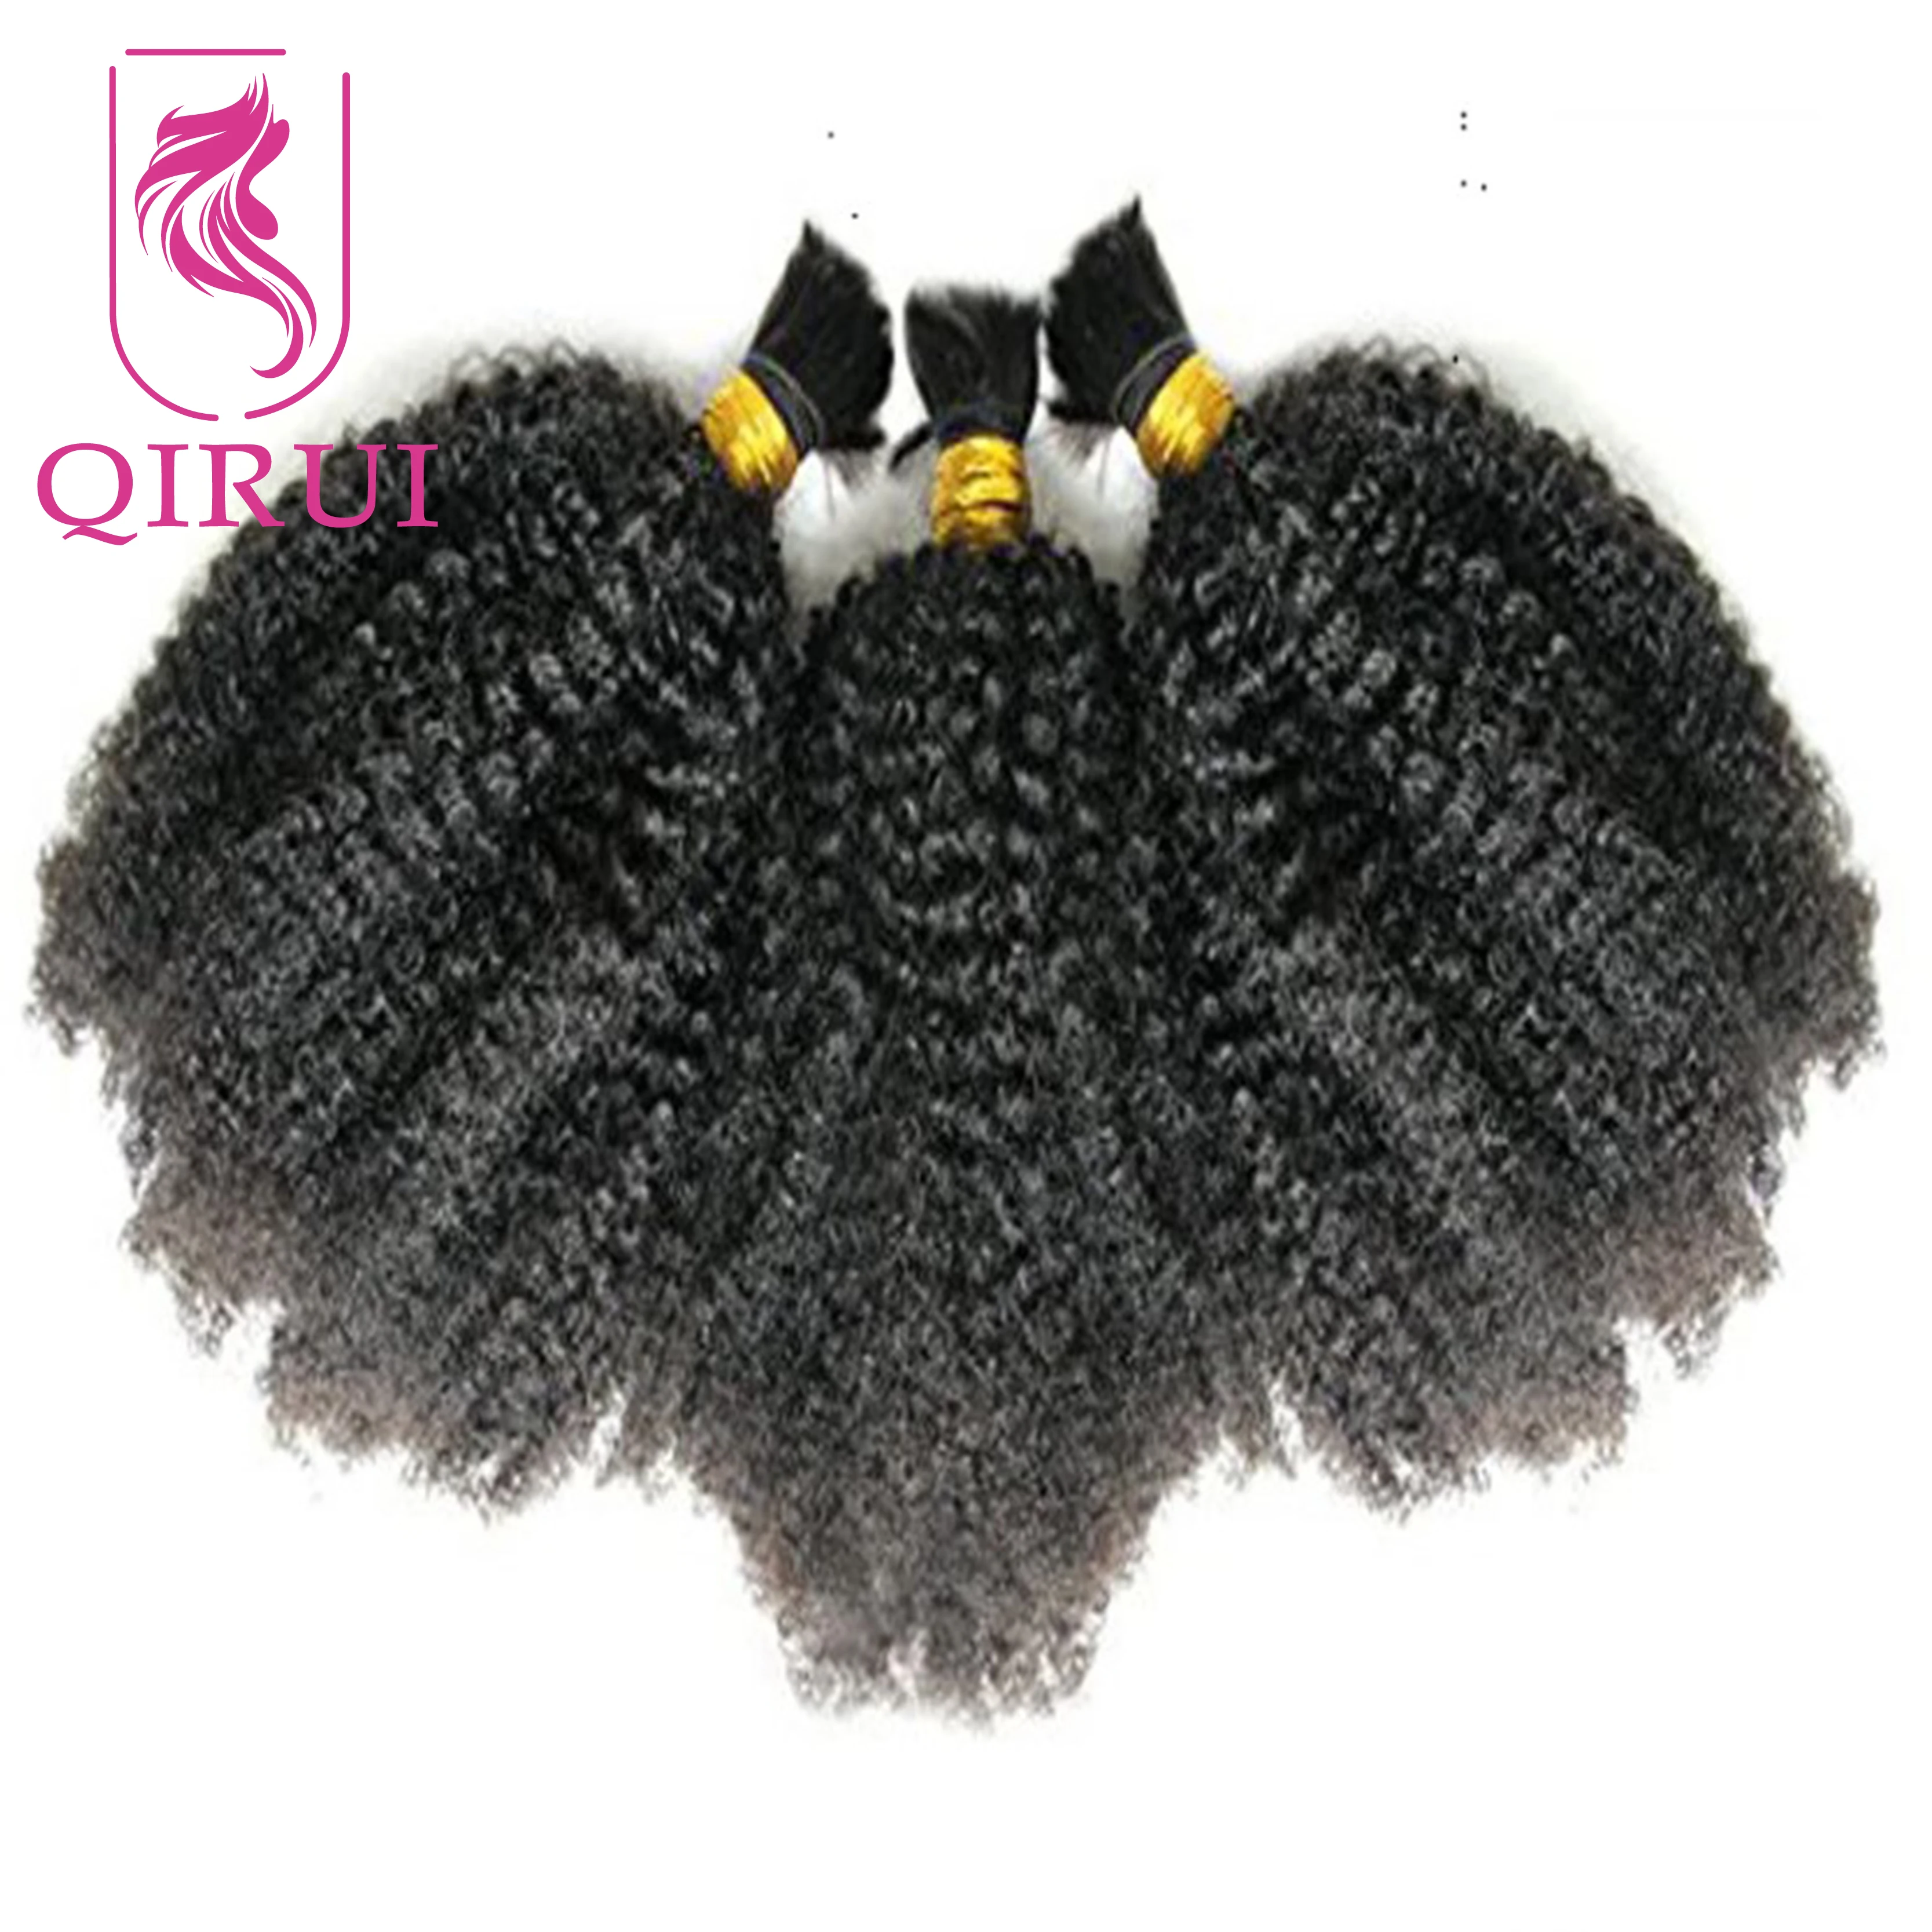 

Afro Kinky Curly Human Hair Bulk for Braiding Unprocessed Brazilian Remy Human Hair Extension Bundles No Weft Natural Color